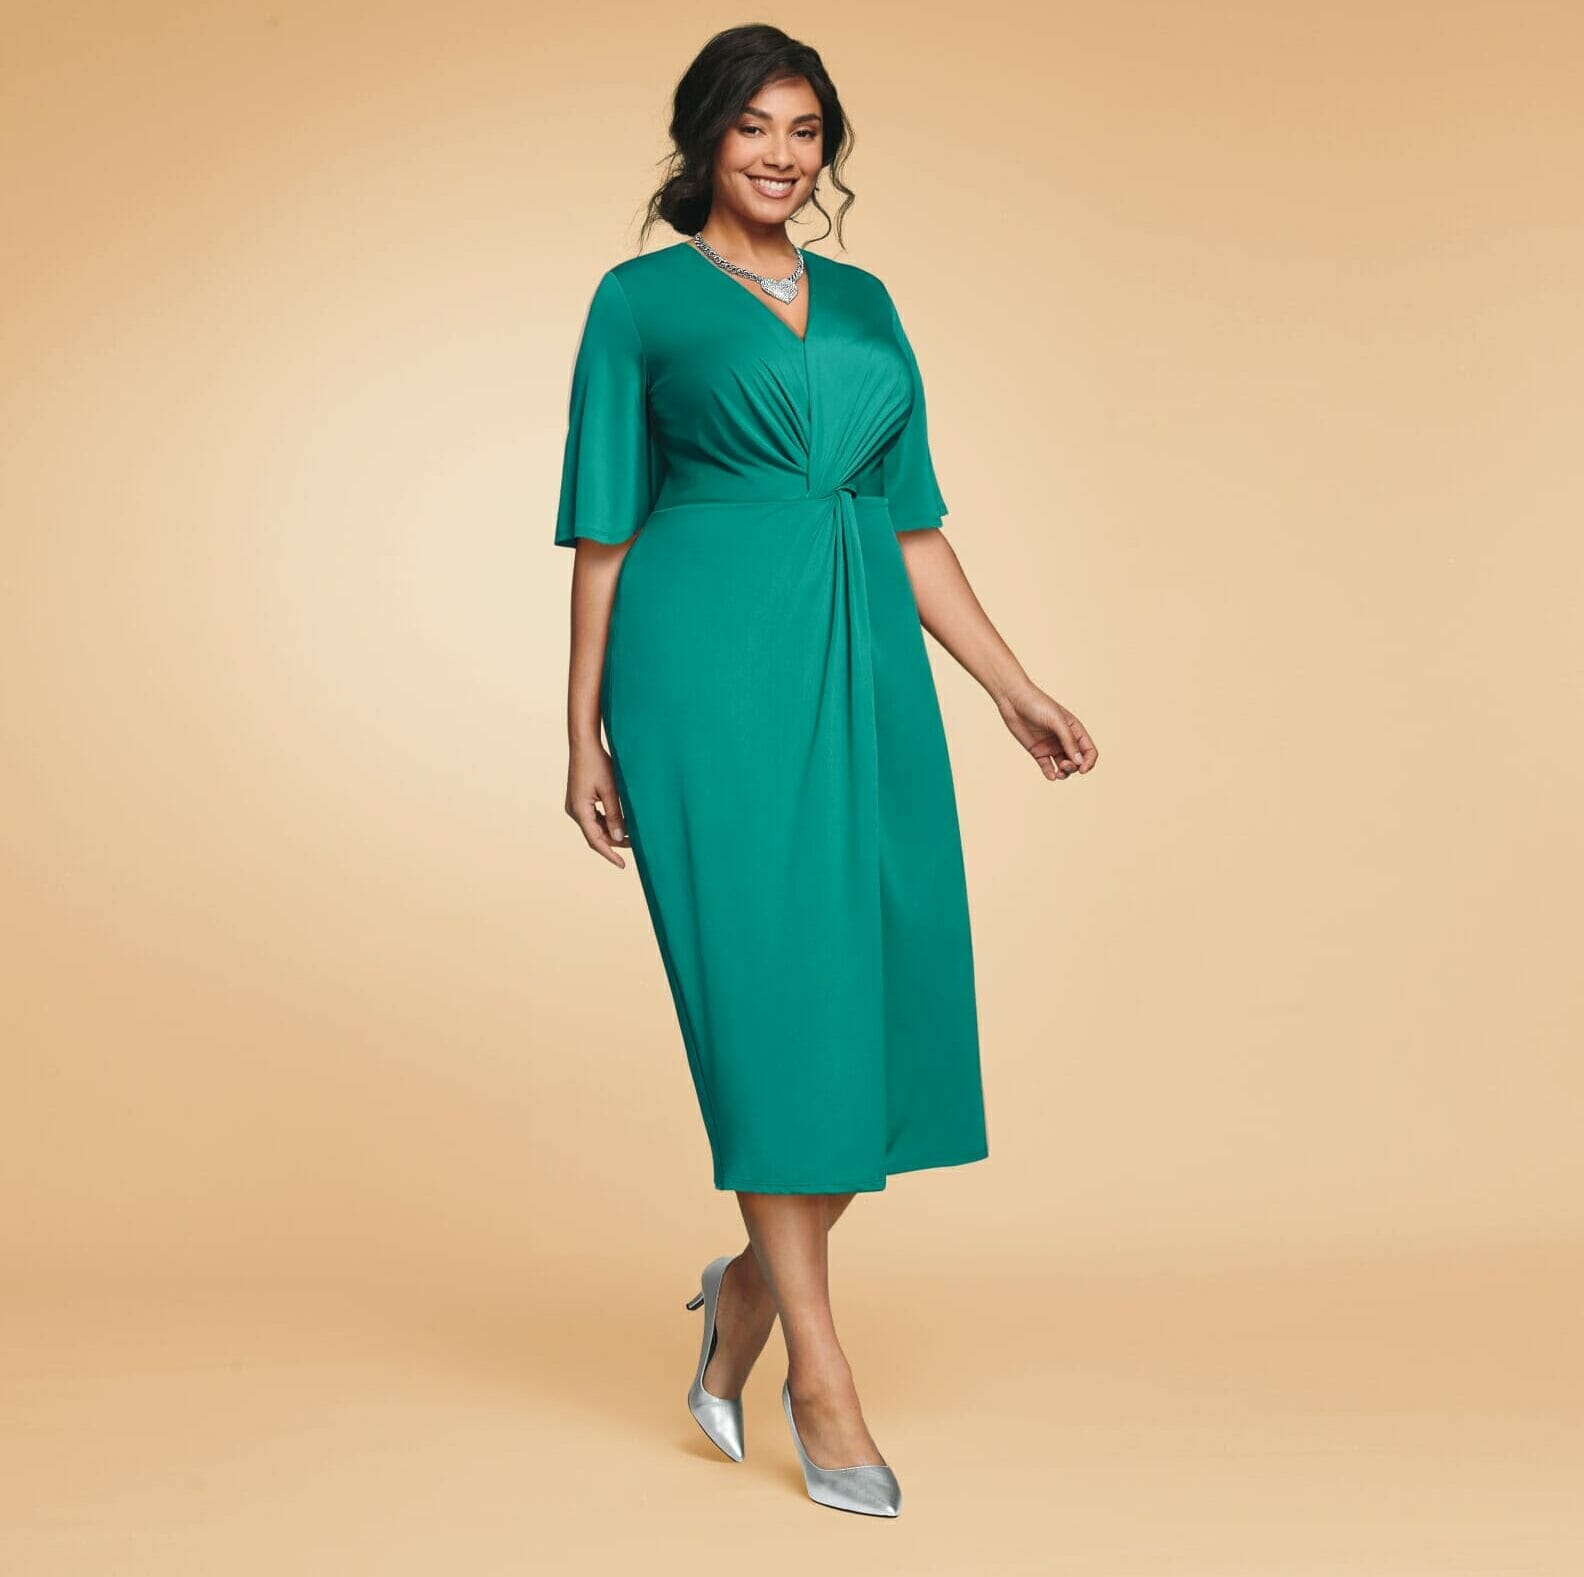 Plus size model wearing sage colored dress.